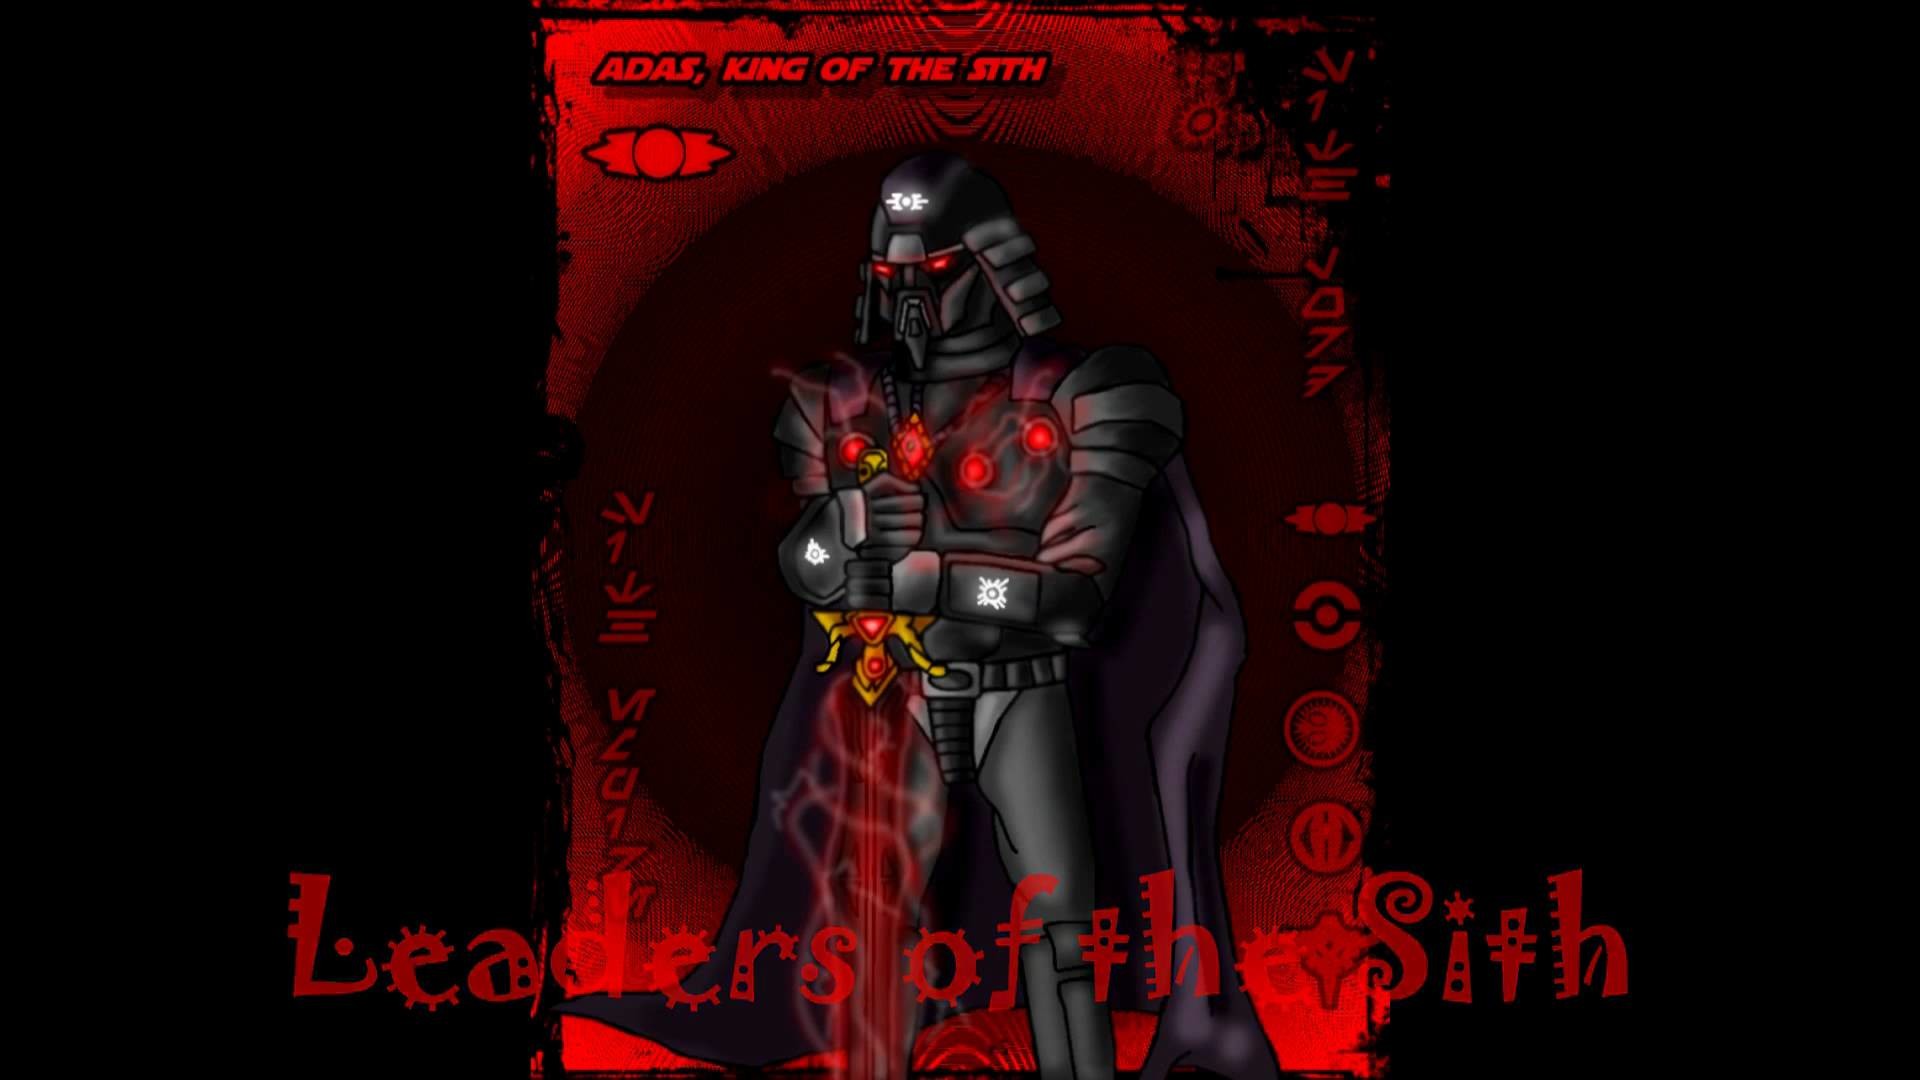 1920x1080 Leaders of the Sith and The Sith Code